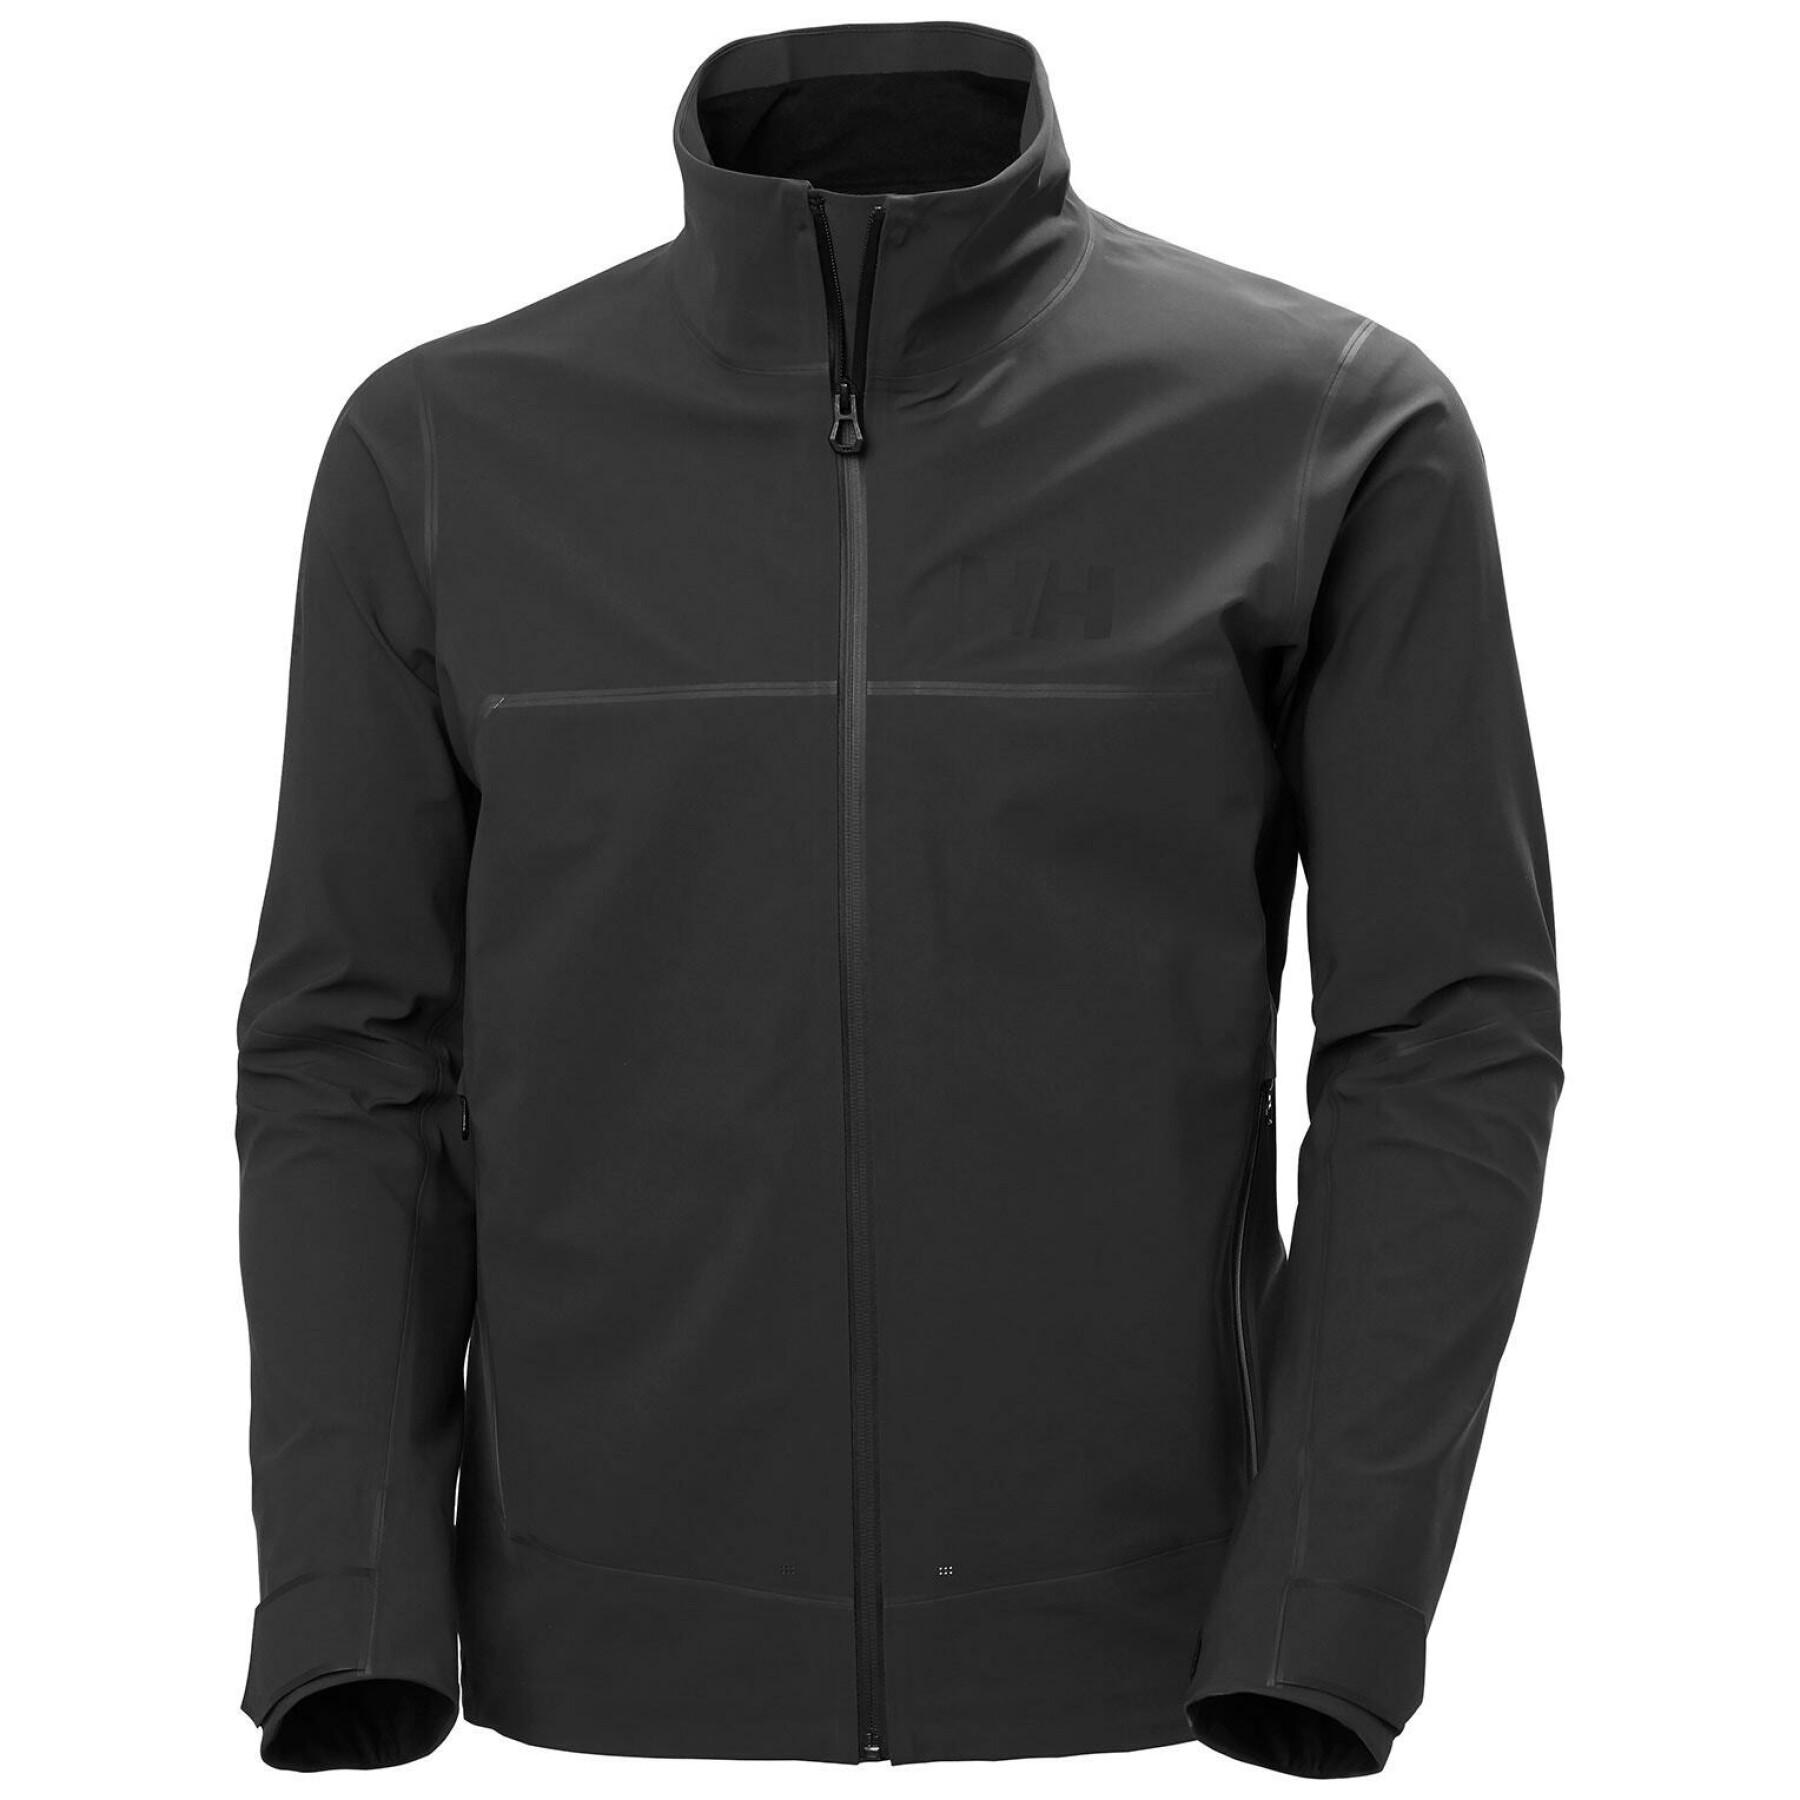 Chaqueta impermeable Softshell Helly Hansen Foil Pro